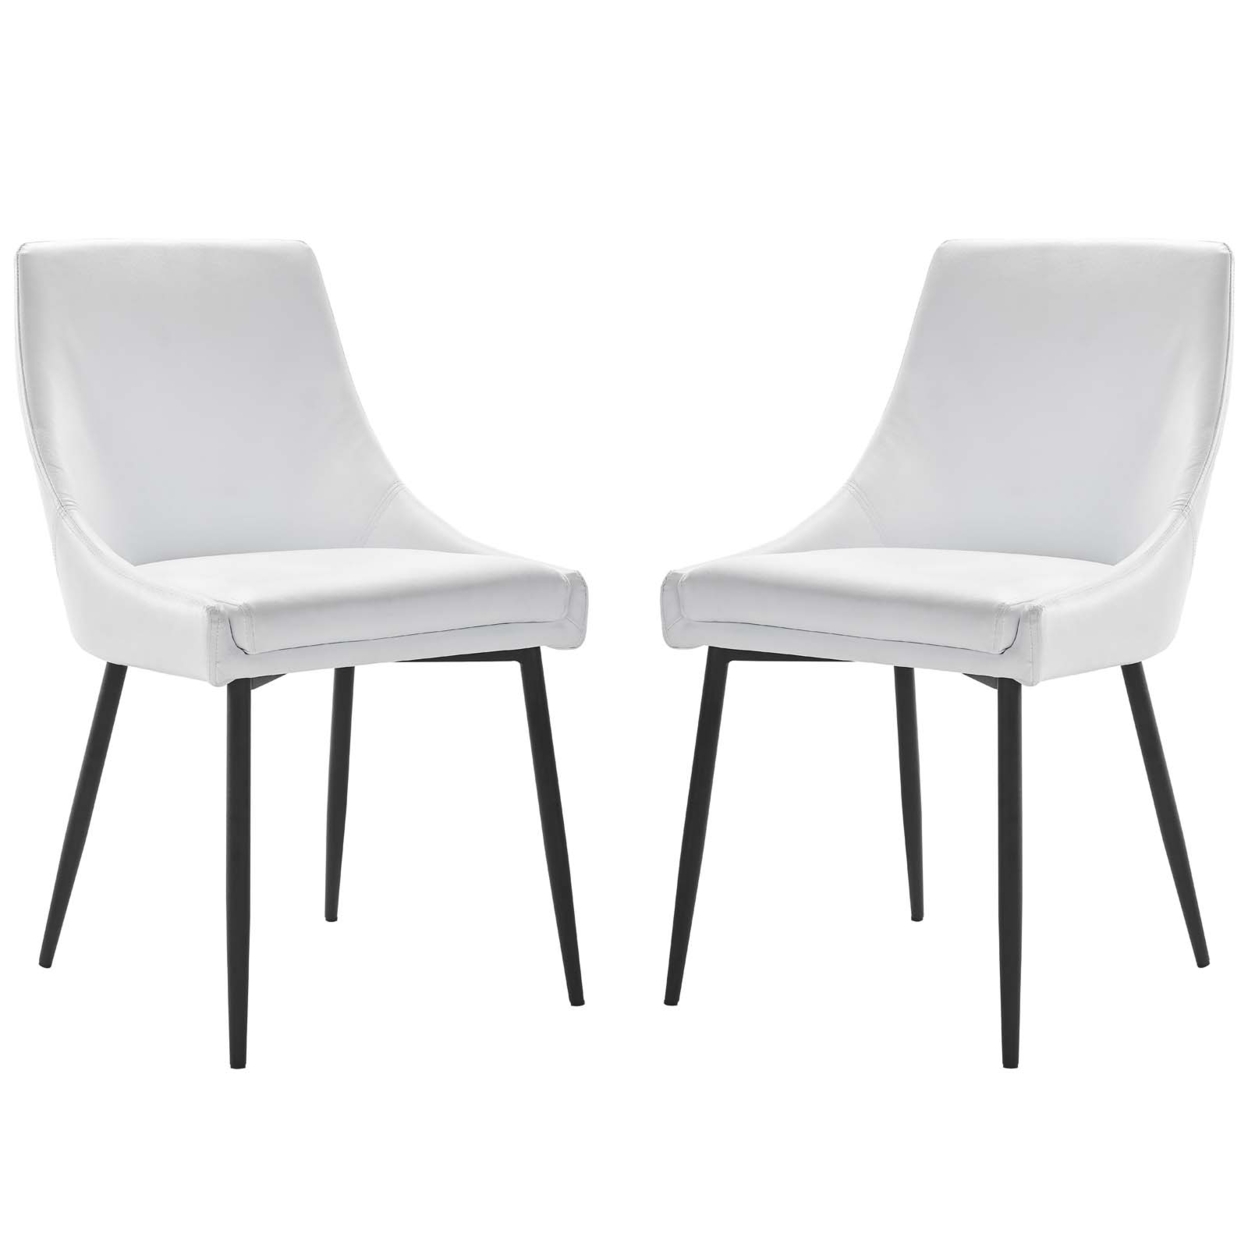 Viscount Vegan Leather Dining Chairs - Set Of 2, Black White